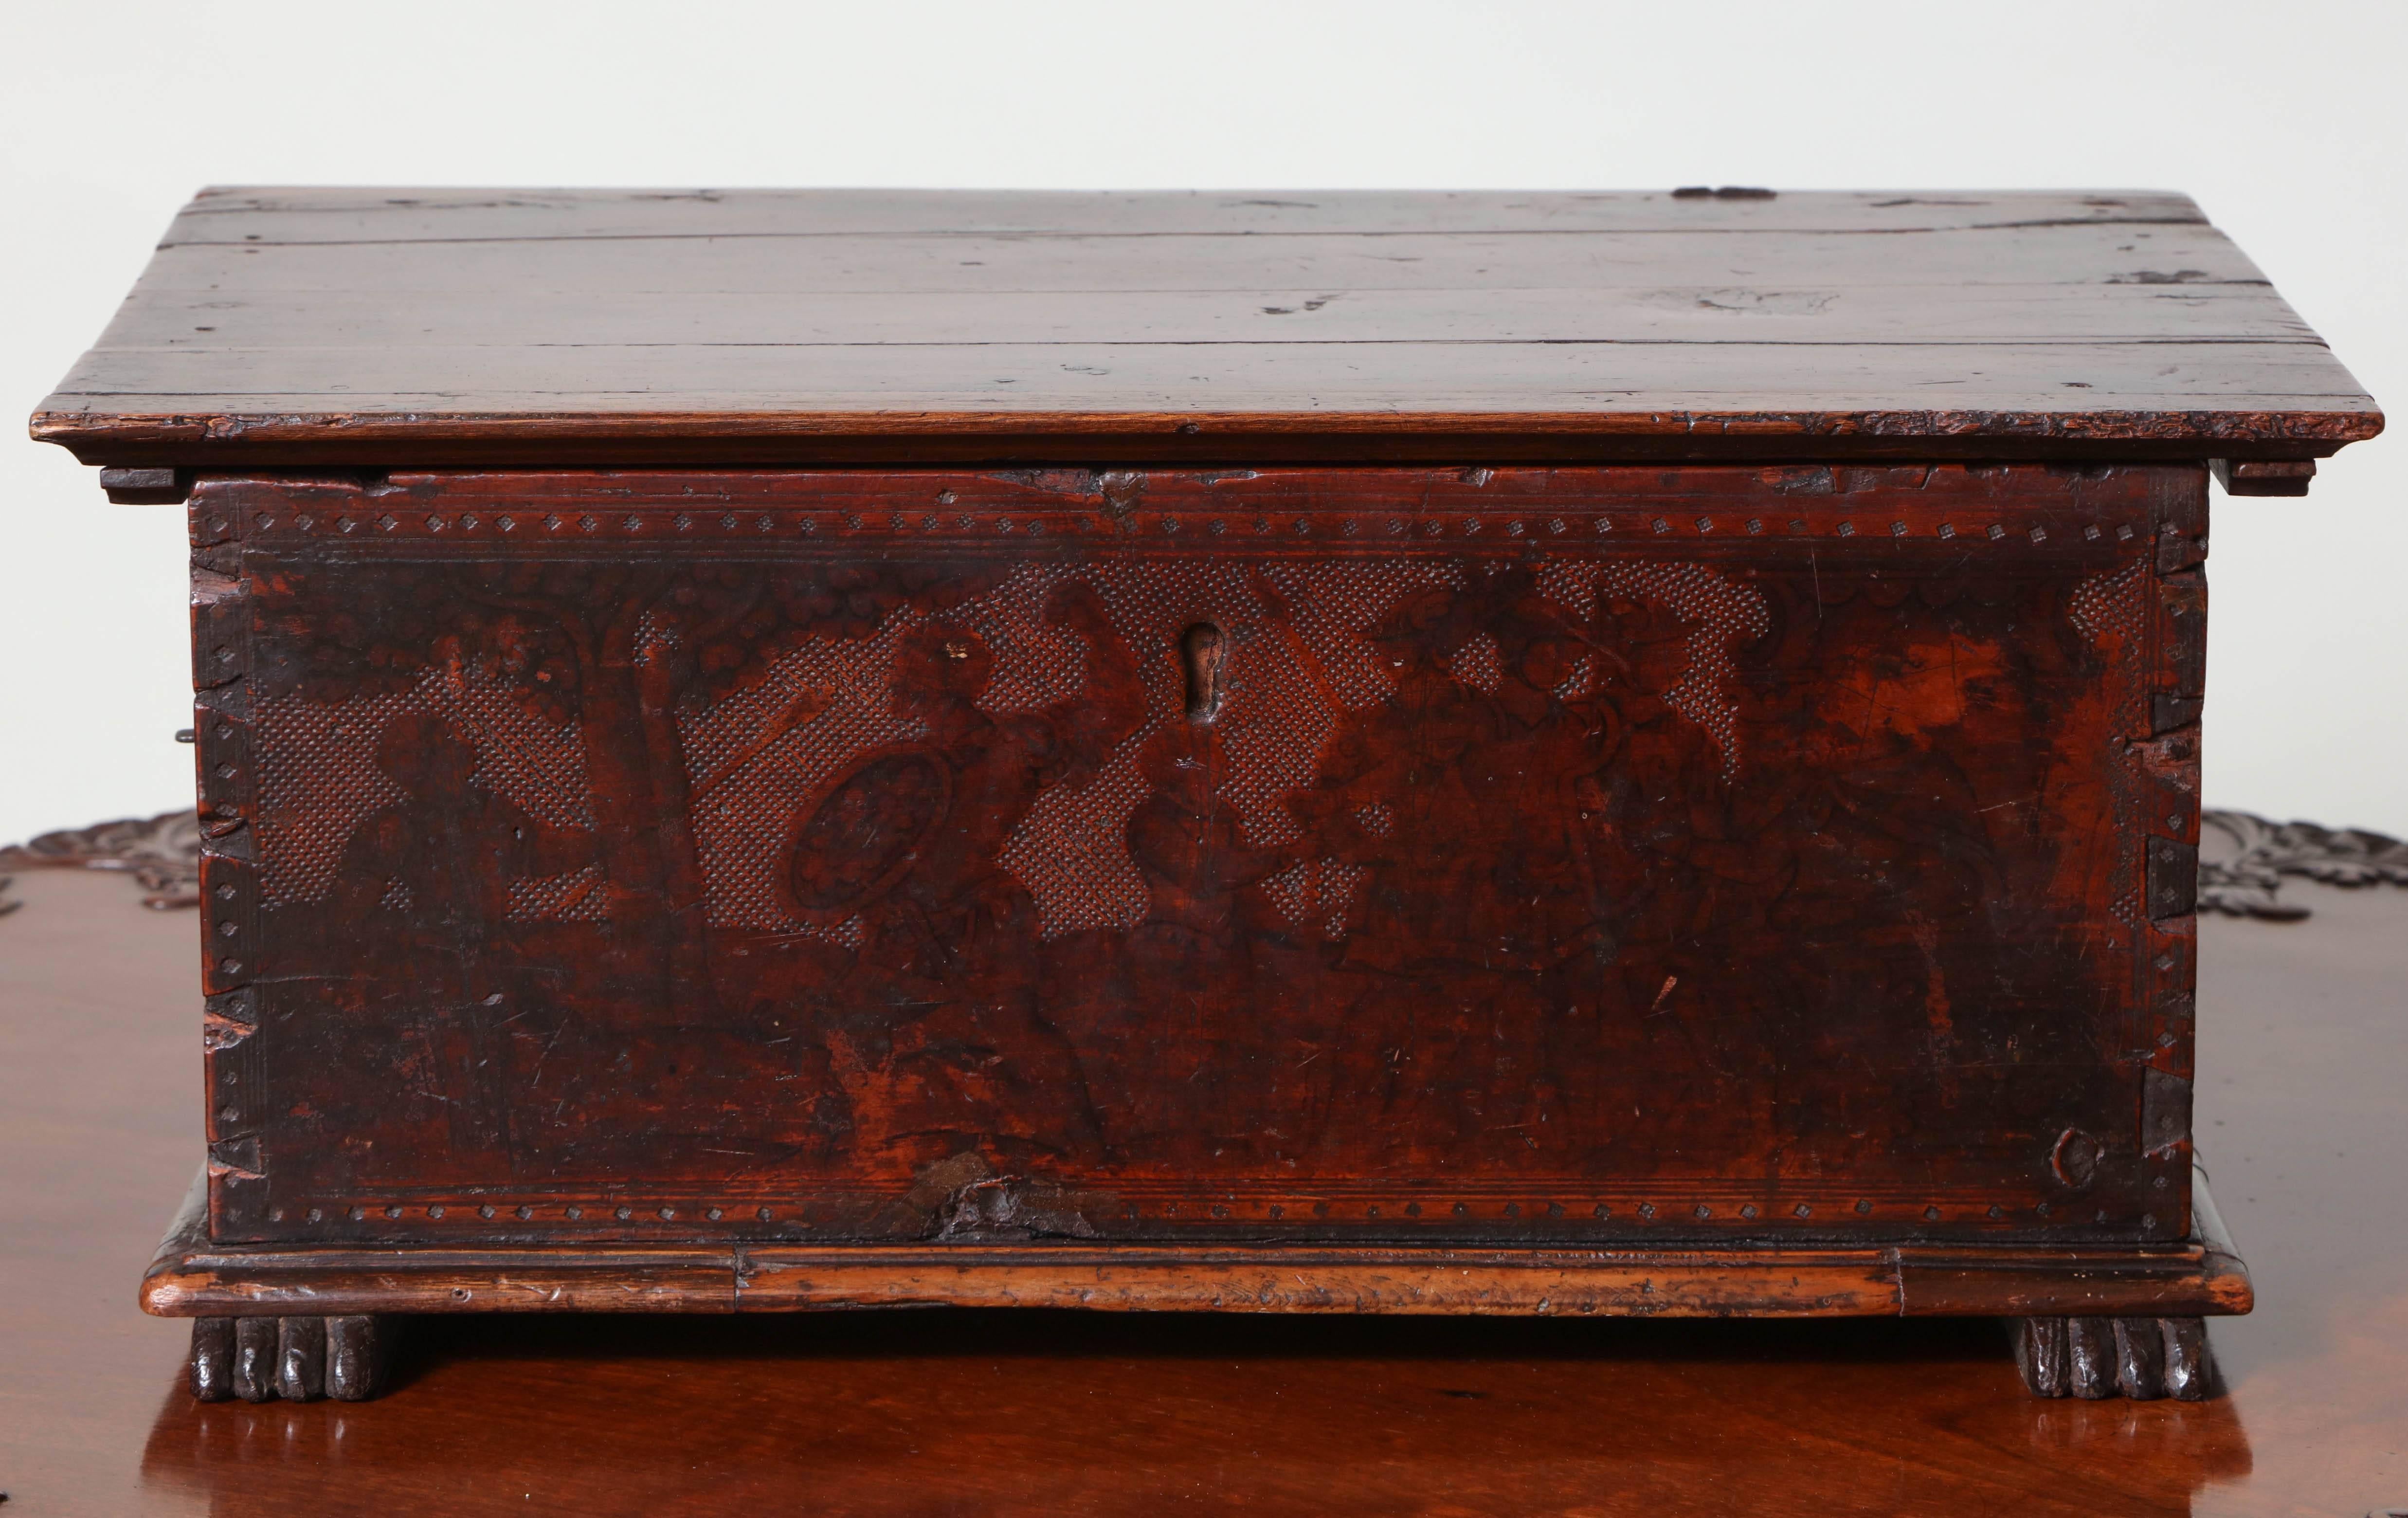 Good 17th century Venetian cedar wood box decorated with penwork and pokerwork drawings with classical figures, retaining rich old surface and original hardware.